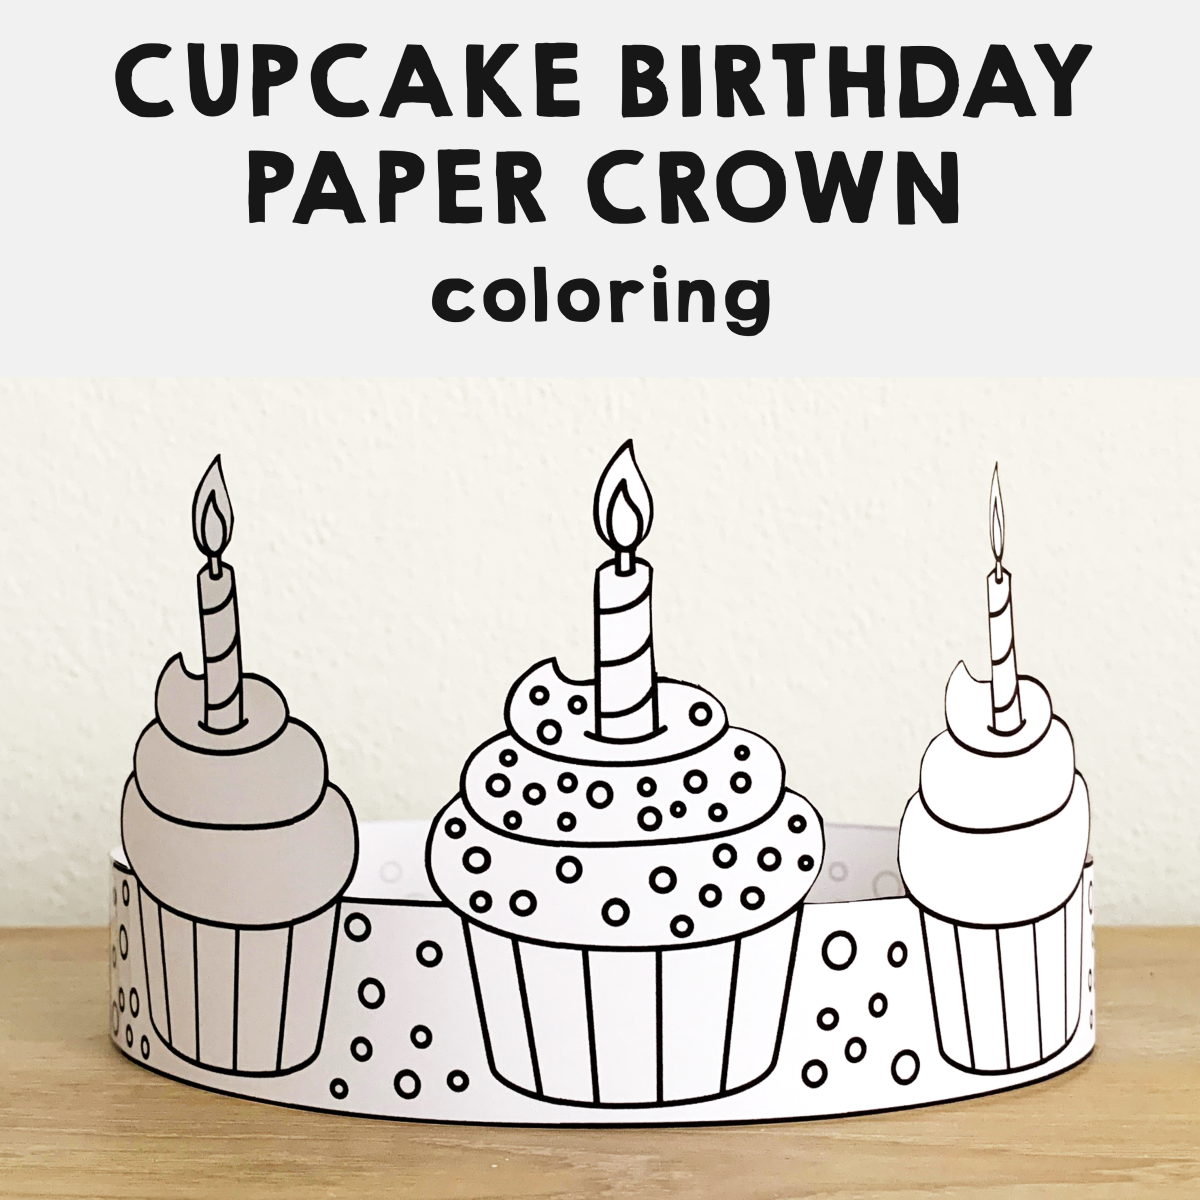 Birthday cupcakes paper crown printable coloring craft activity made by teachers